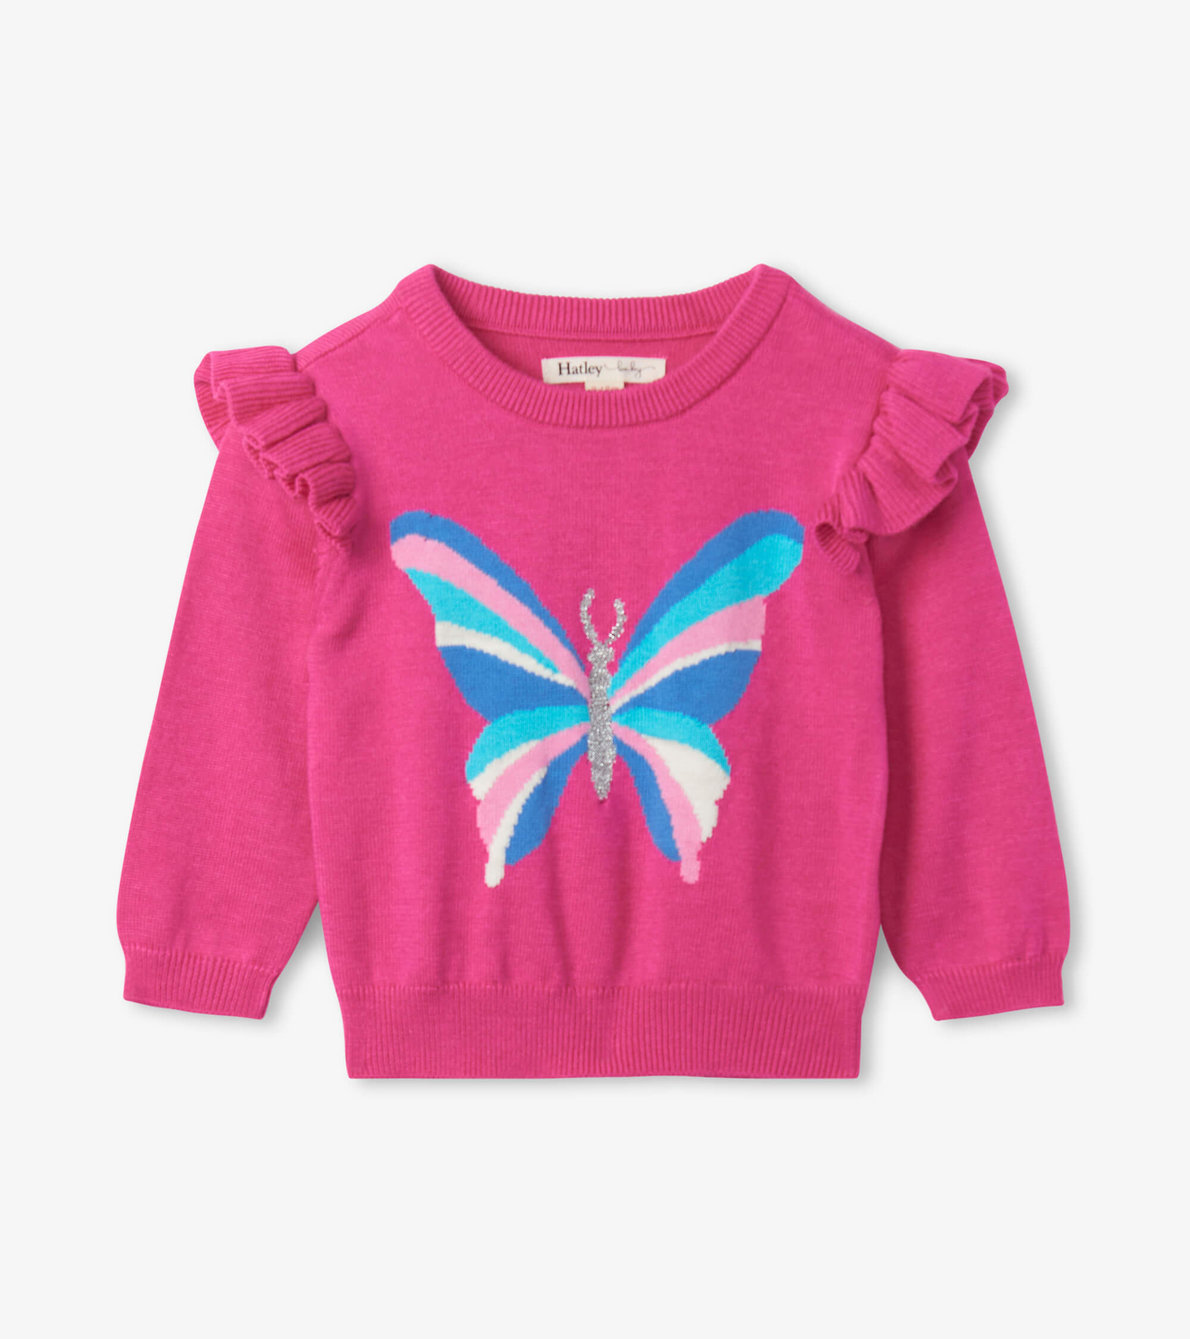 View larger image of Stripy Butterfly Baby Ruffle Sleeve Sweater